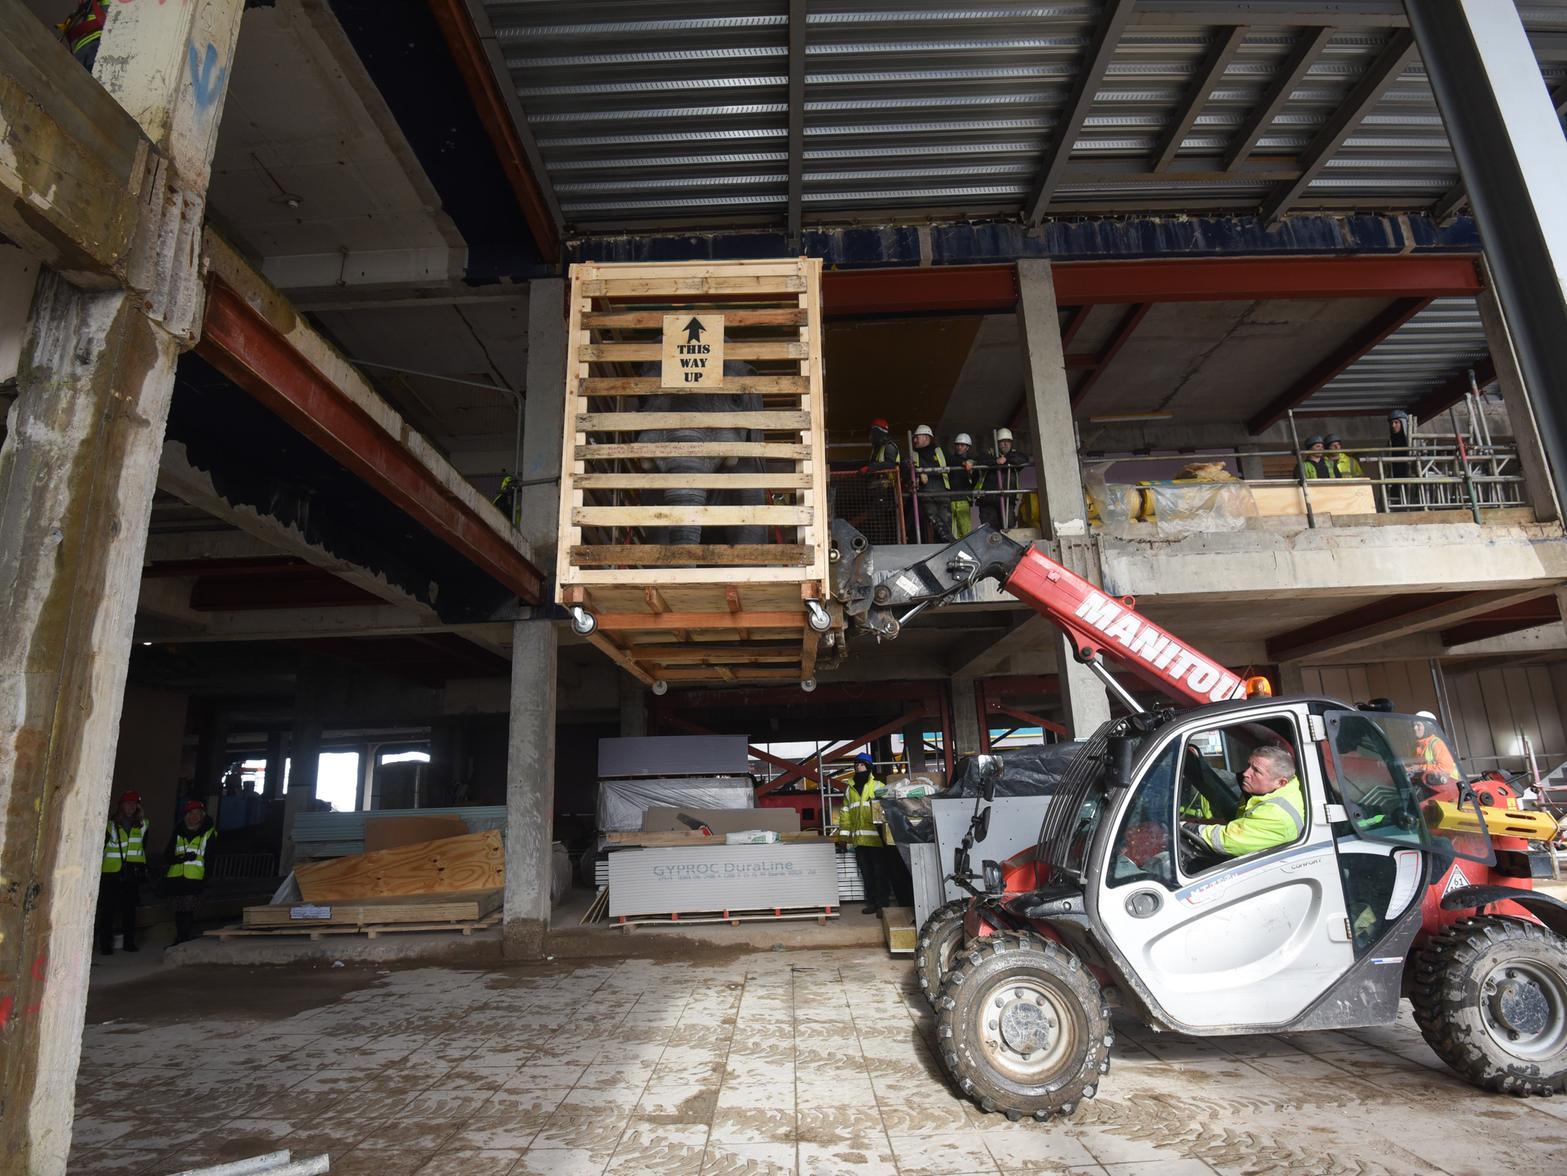 A forklift truck was used to haul the crate up to the first floor of the Sands resort hotel being built on Central Promenade